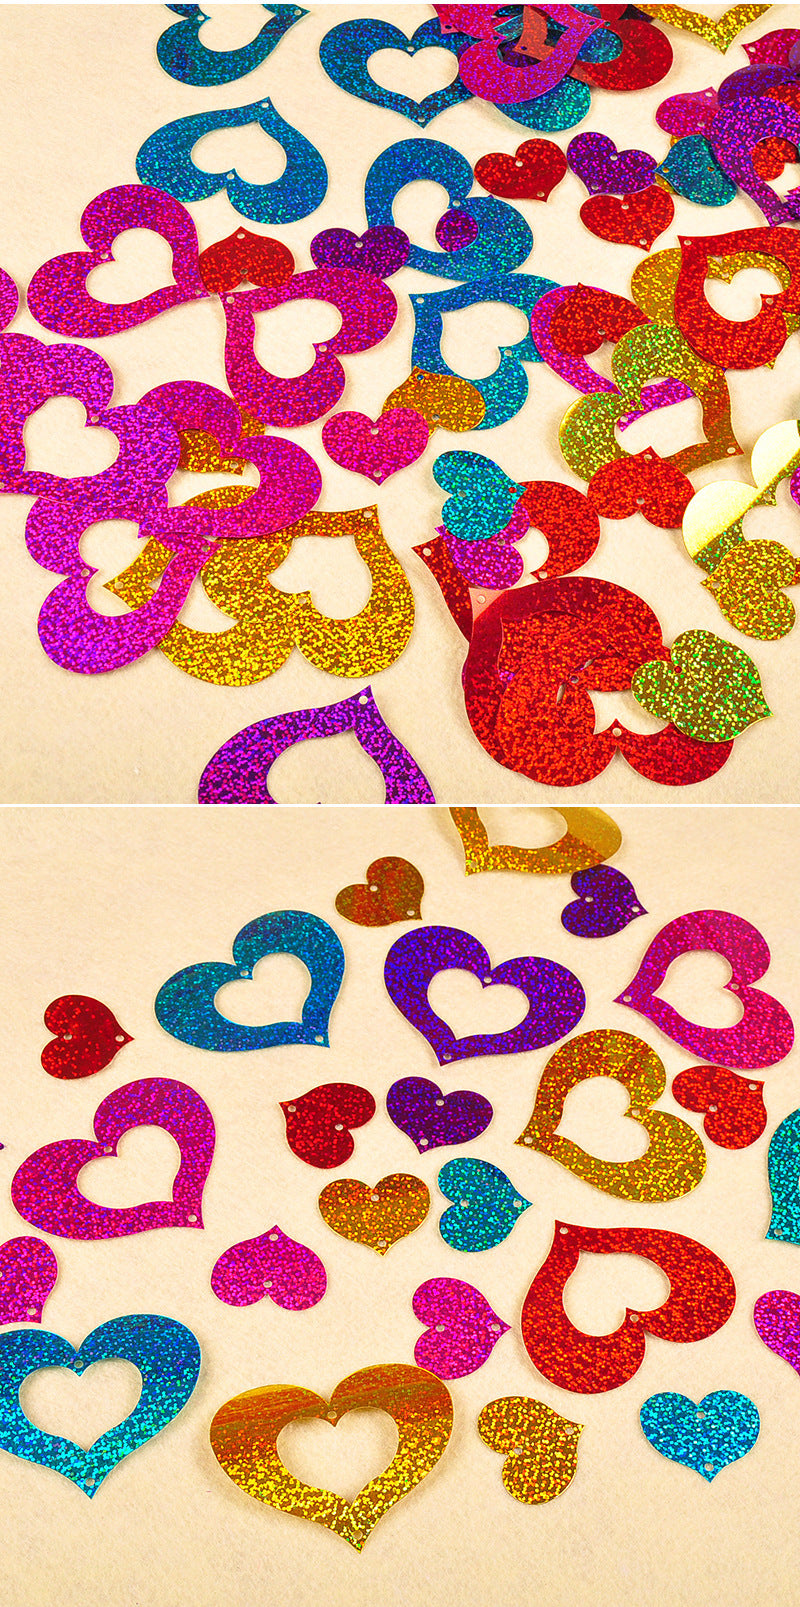 Rain Silk Balloon Pendant 100 Beads Sequins Heart-shaped Wedding Supplies Wedding Room Decoration Birthday Decoration Supplies, Valentine's Day decor, Romantic home accents, Heart-themed decorations, Cupid-inspired ornaments, Love-themed party supplies, Red and pink decor, Valentine's Day table settings, Romantic ambiance accessories, Heart-shaped embellishments, Valentine's Day home embellishments